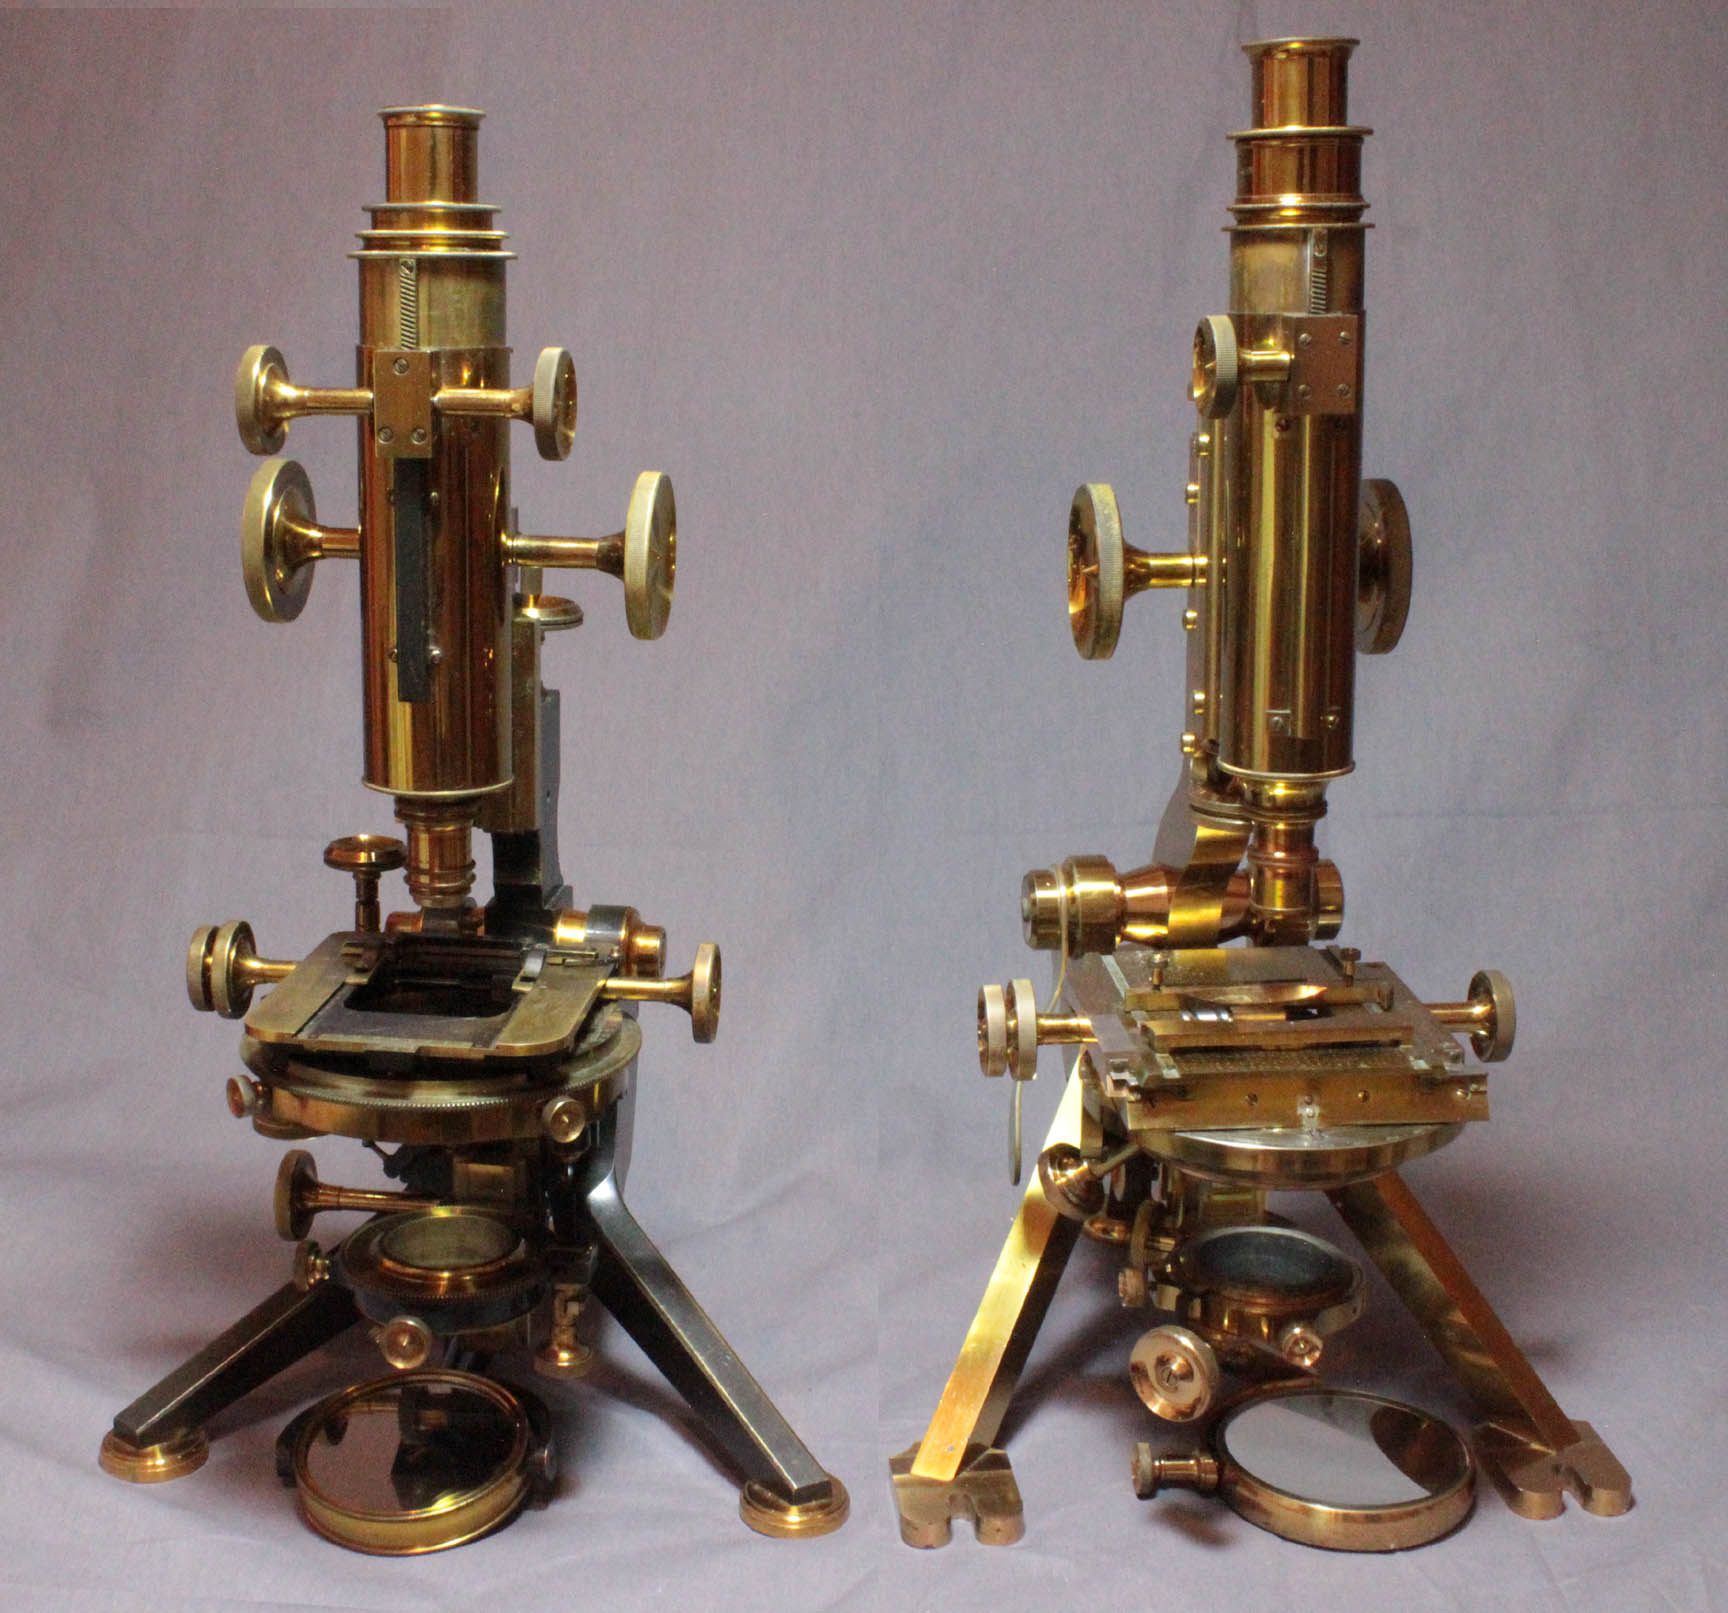 Nelson No 1a microscope next to a Watson Grand Van Heurck  at same scale